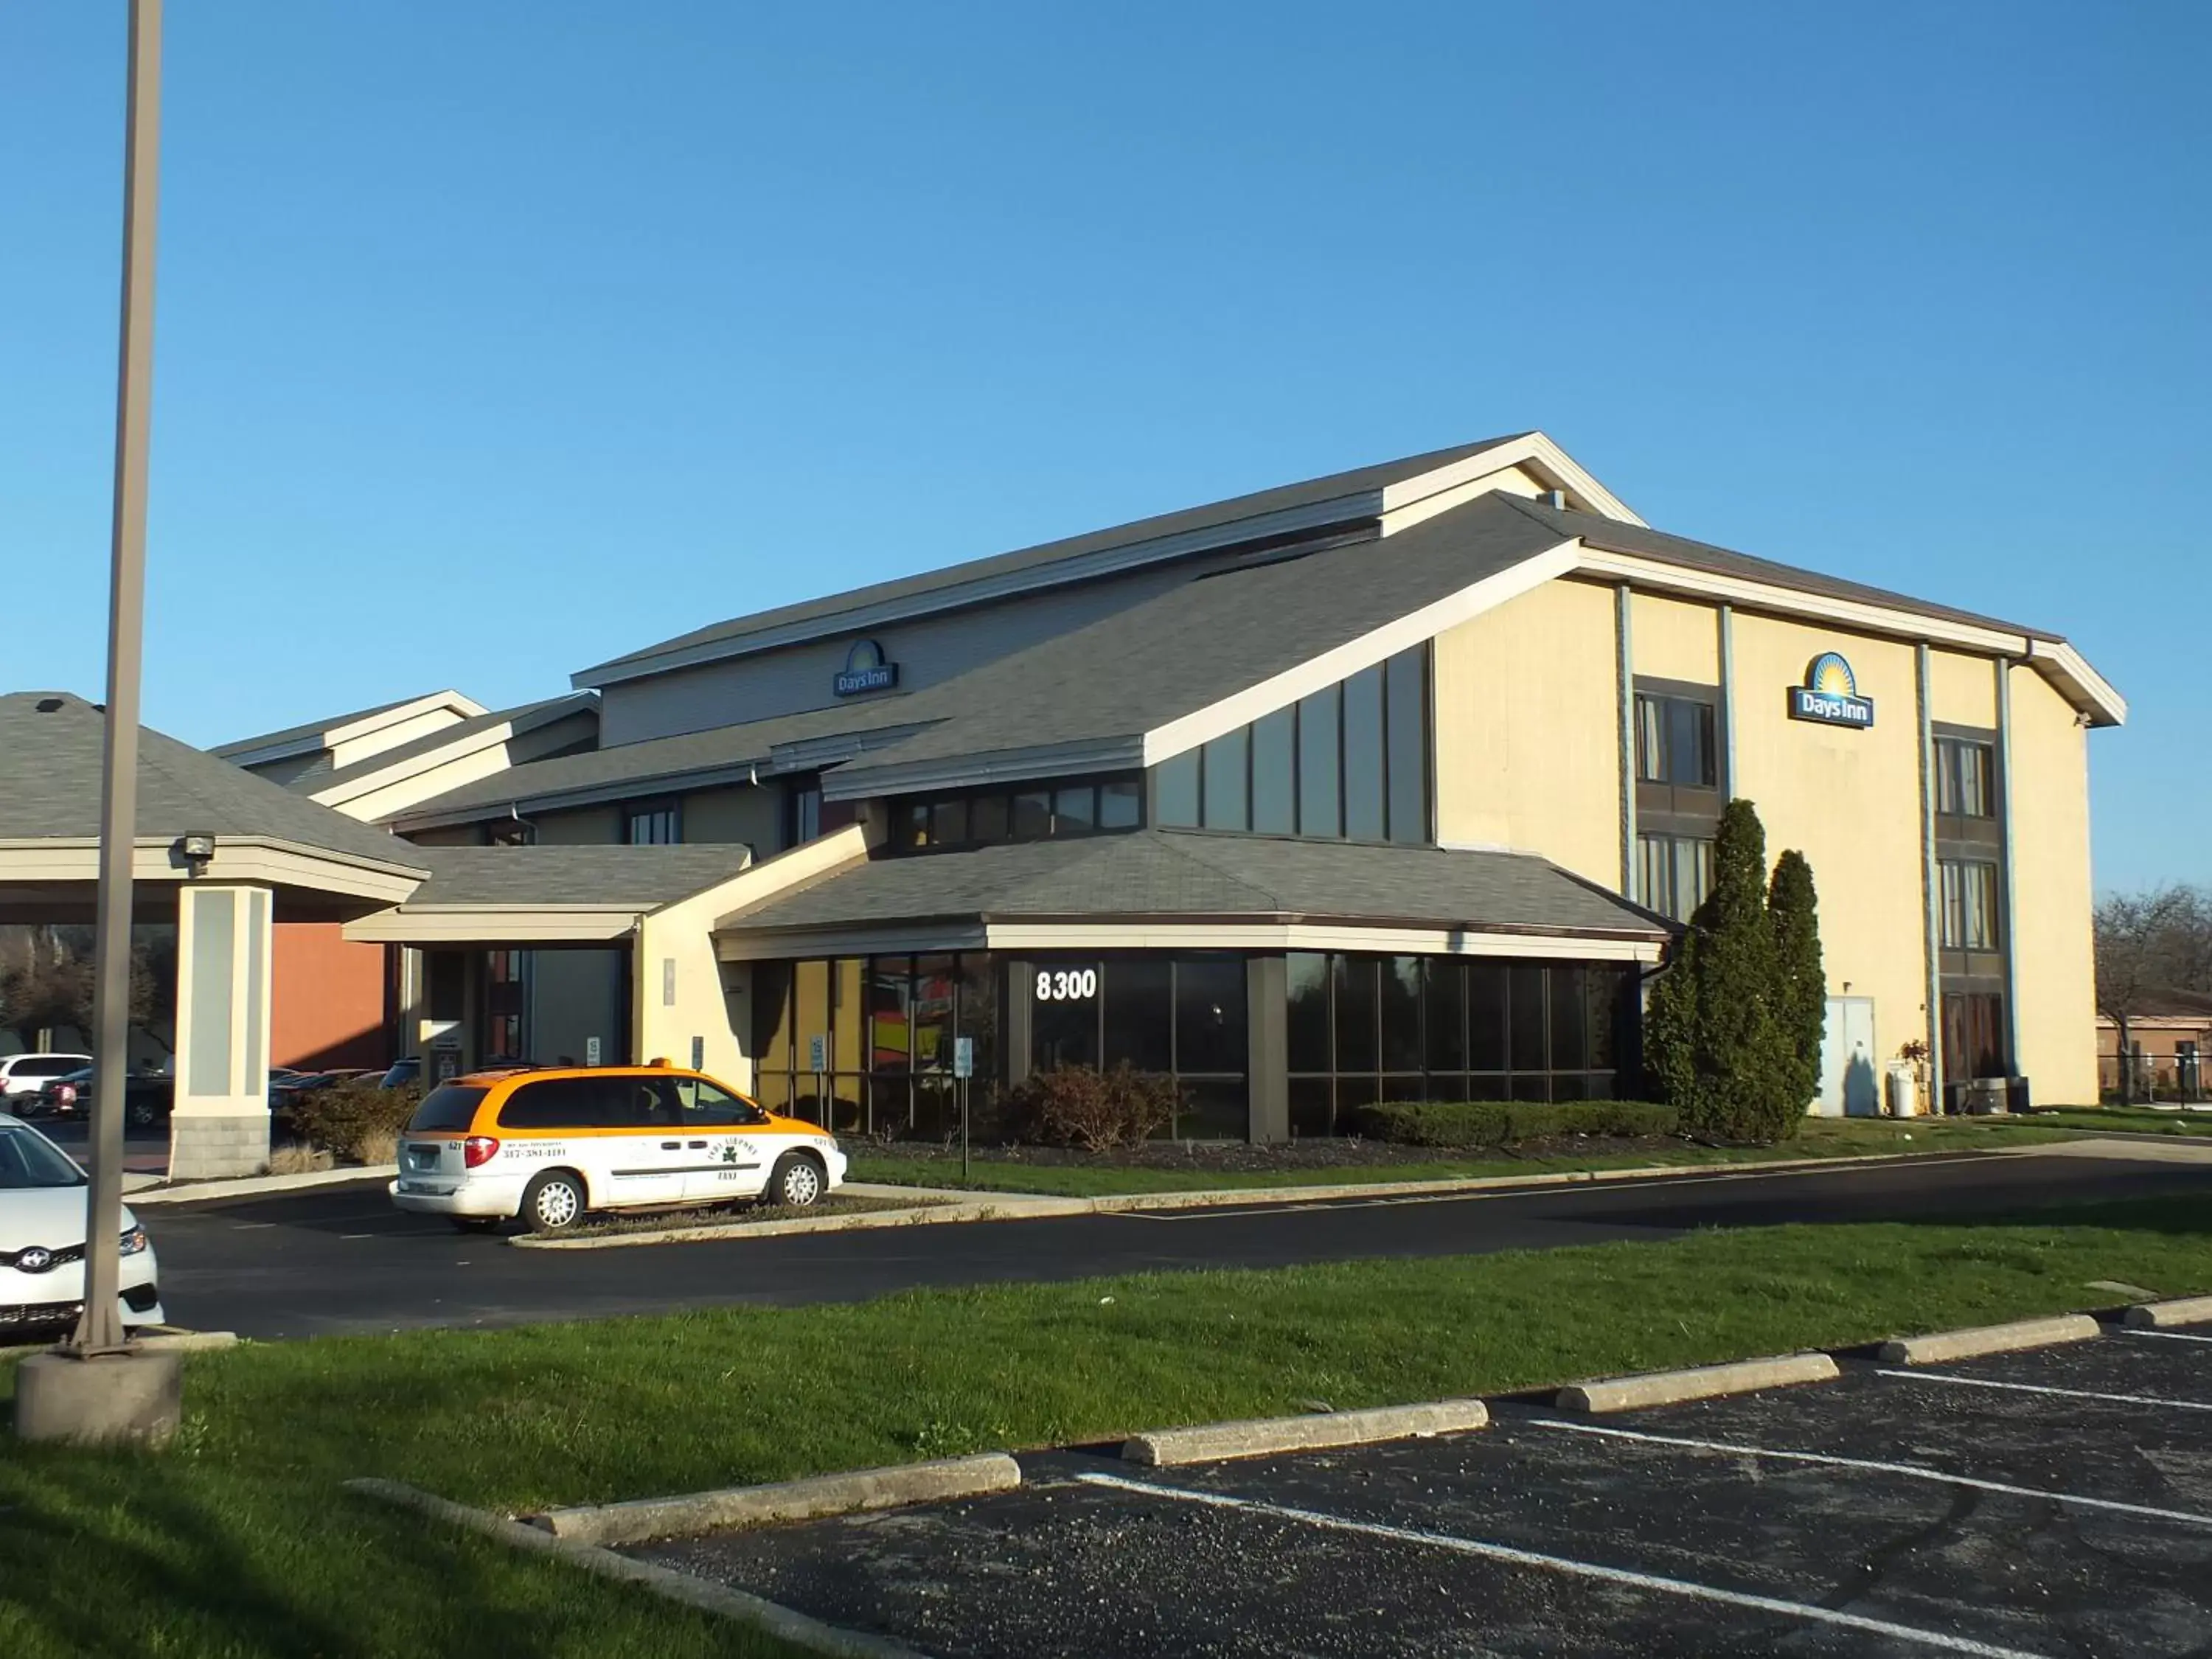 Property Building in Days Inn by Wyndham Indianapolis Northeast